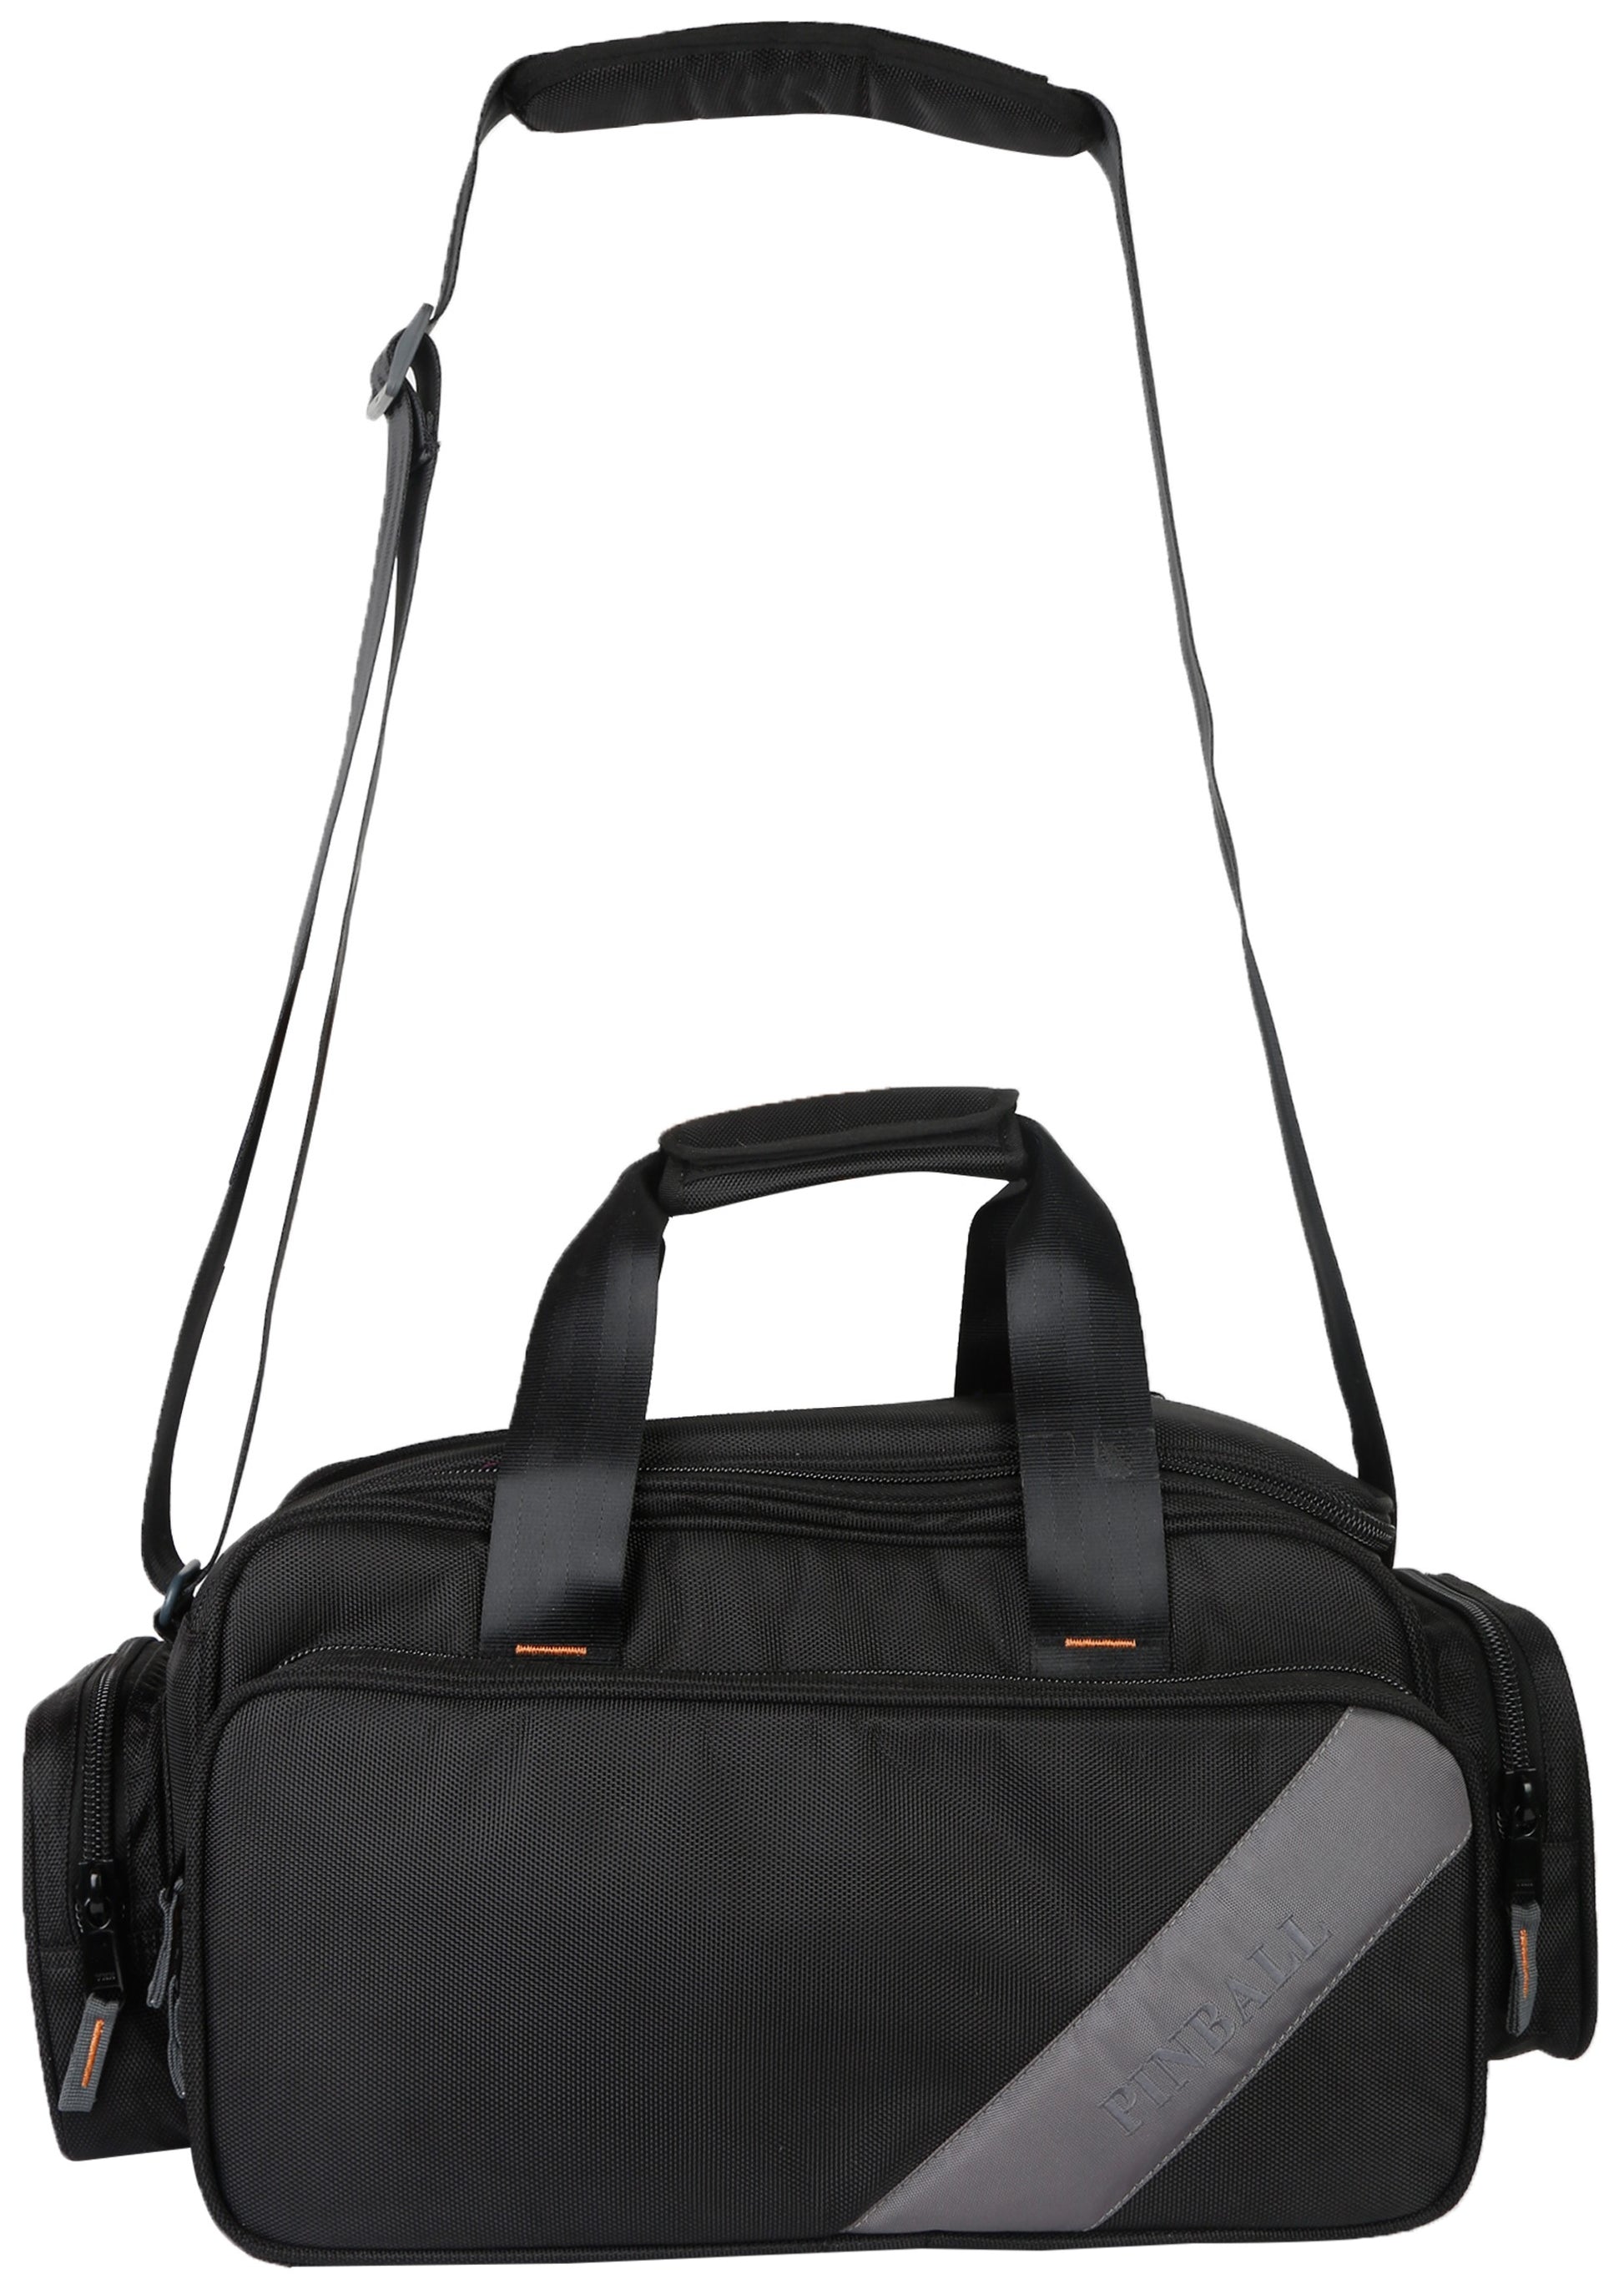 Image: Front view of the P45 Videographer 16 video camera bag, showcasing its rugged and spacious design. The bag's multiple compartments and customizable dividers provide secure storage for video cameras and accessories. Stay organized and ready for professional video shoots with the P45 Videographer 16.